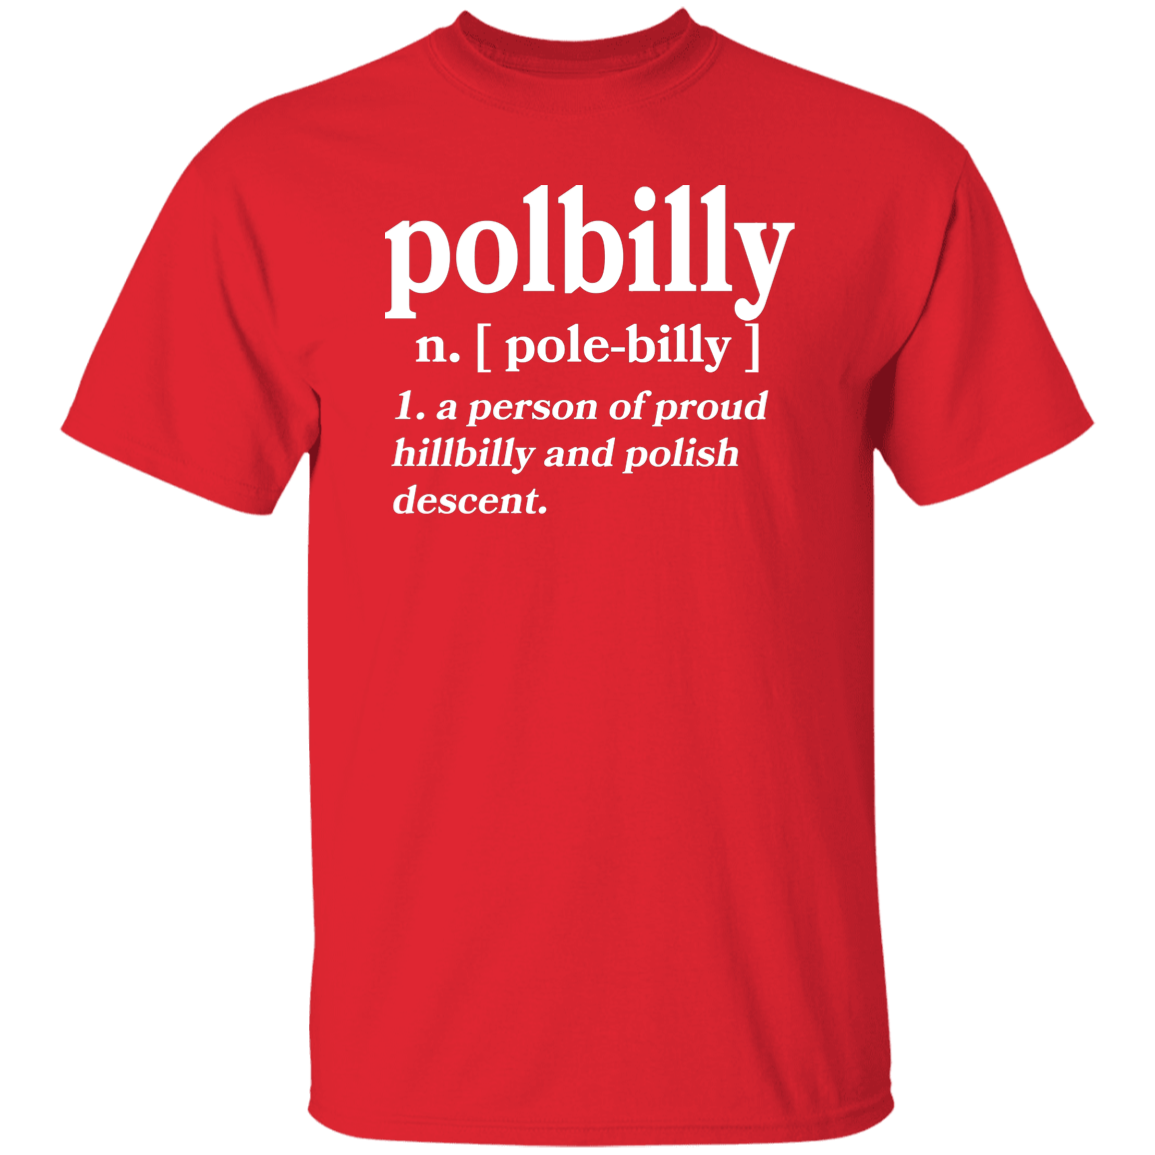 PolBIlly A Person Of Hillbilly And Polish Descent Apparel CustomCat G500 5.3 oz. T-Shirt Red S